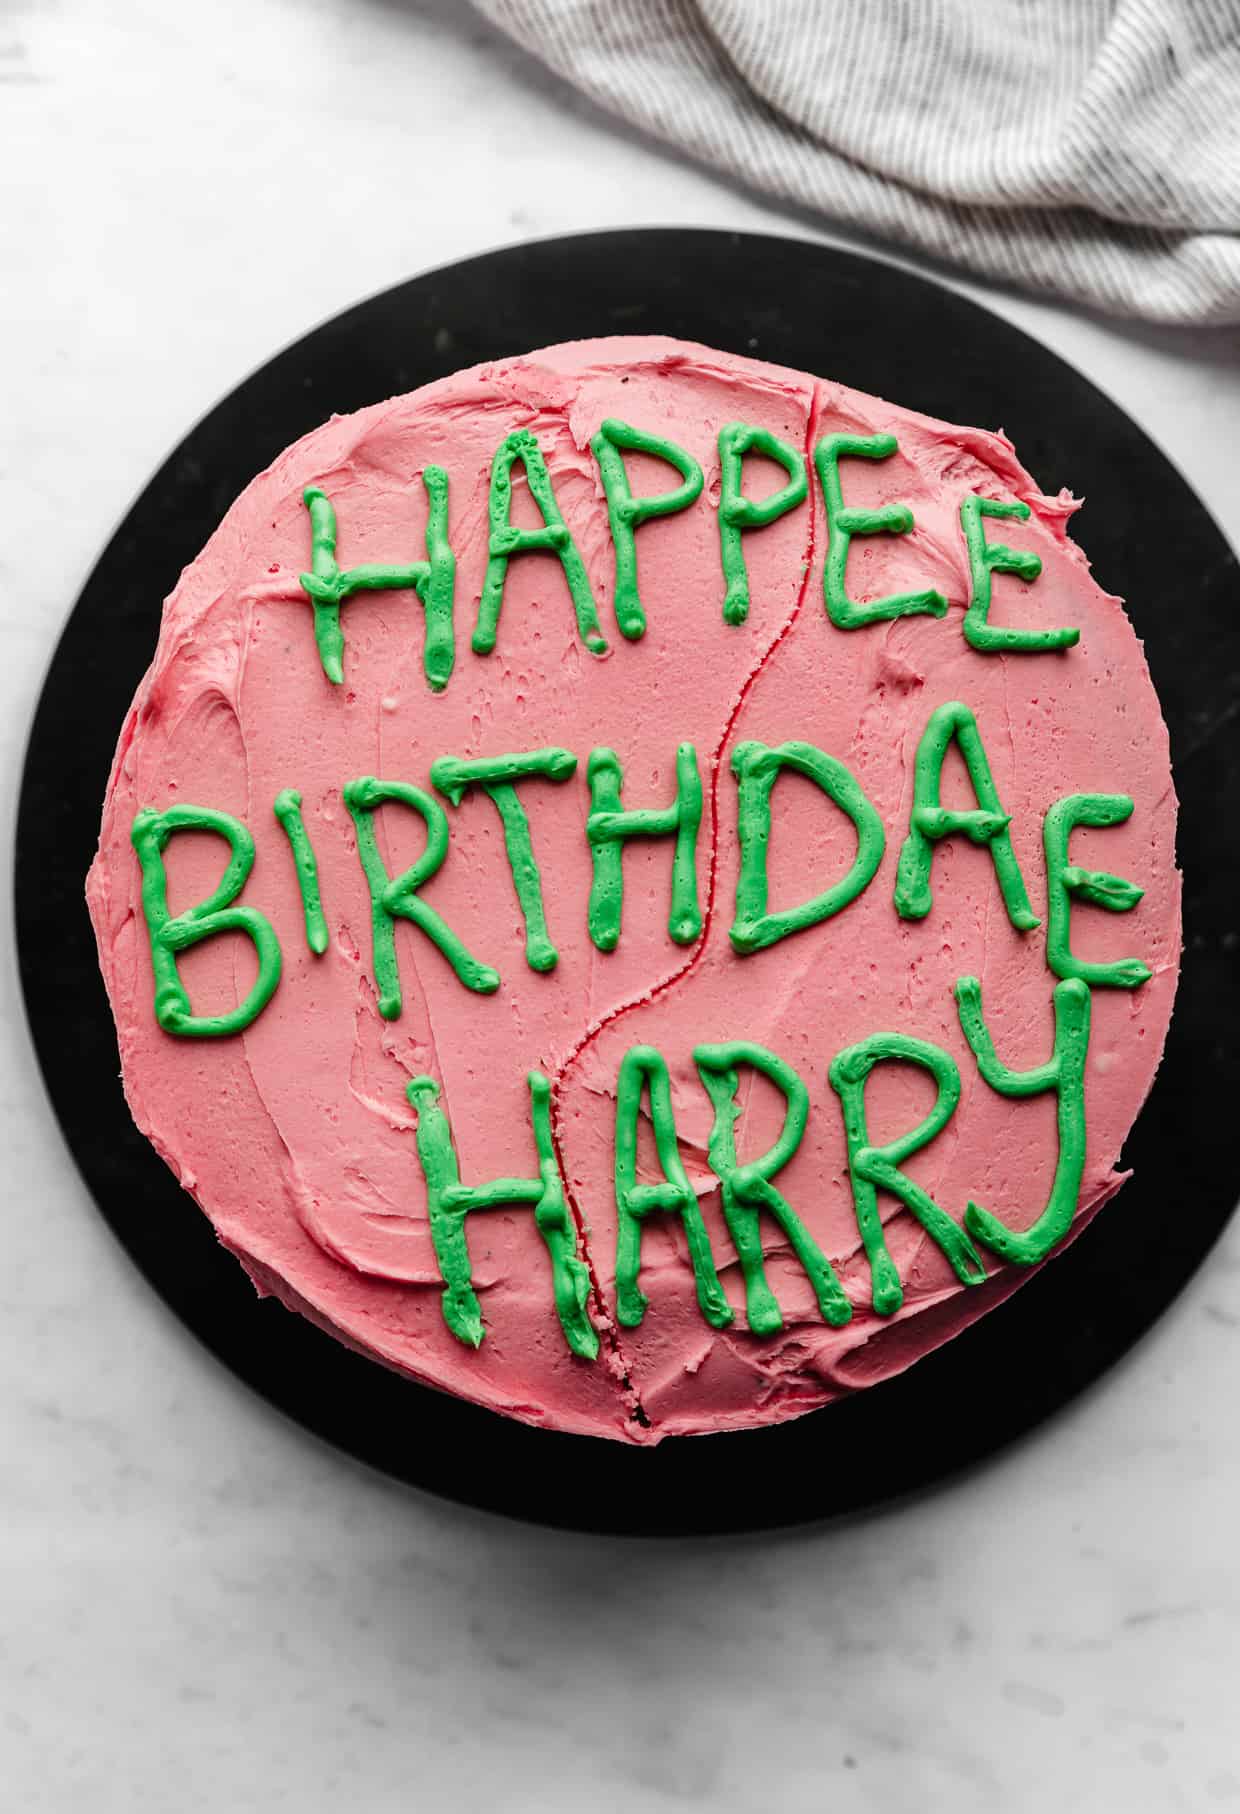 Happee Birthdae Harry written in green frosting on a pink cake.